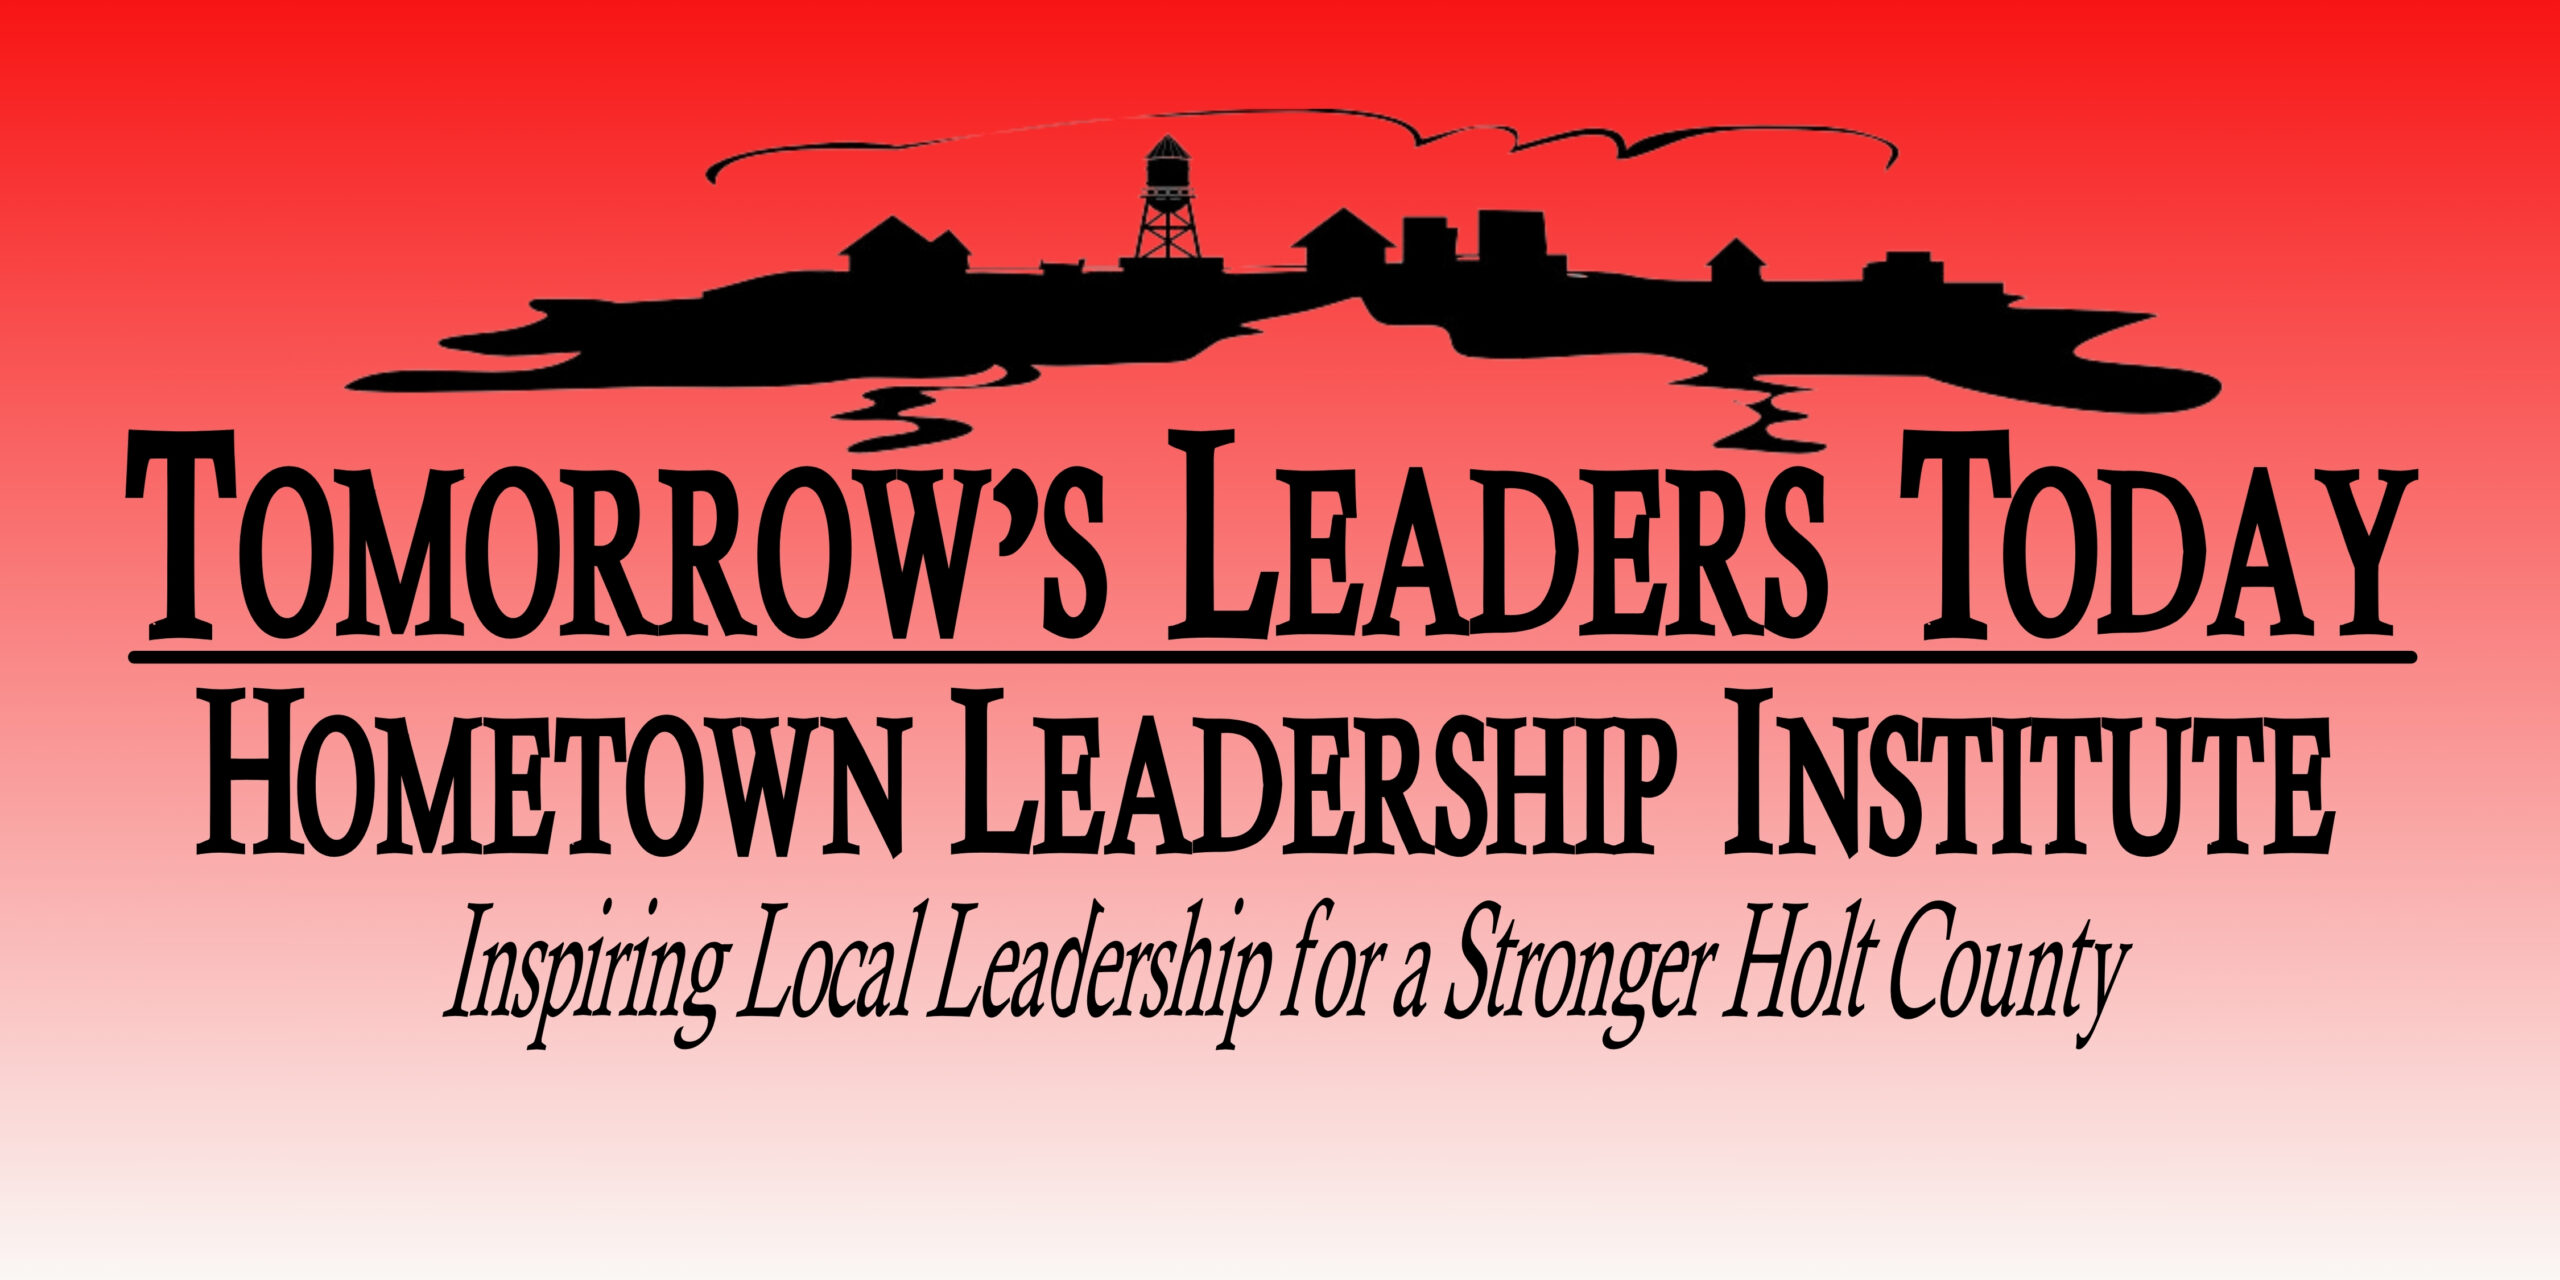 Hometown Leadership Institute<br />
Inspiring Local Leadership for a Stronger Holt County